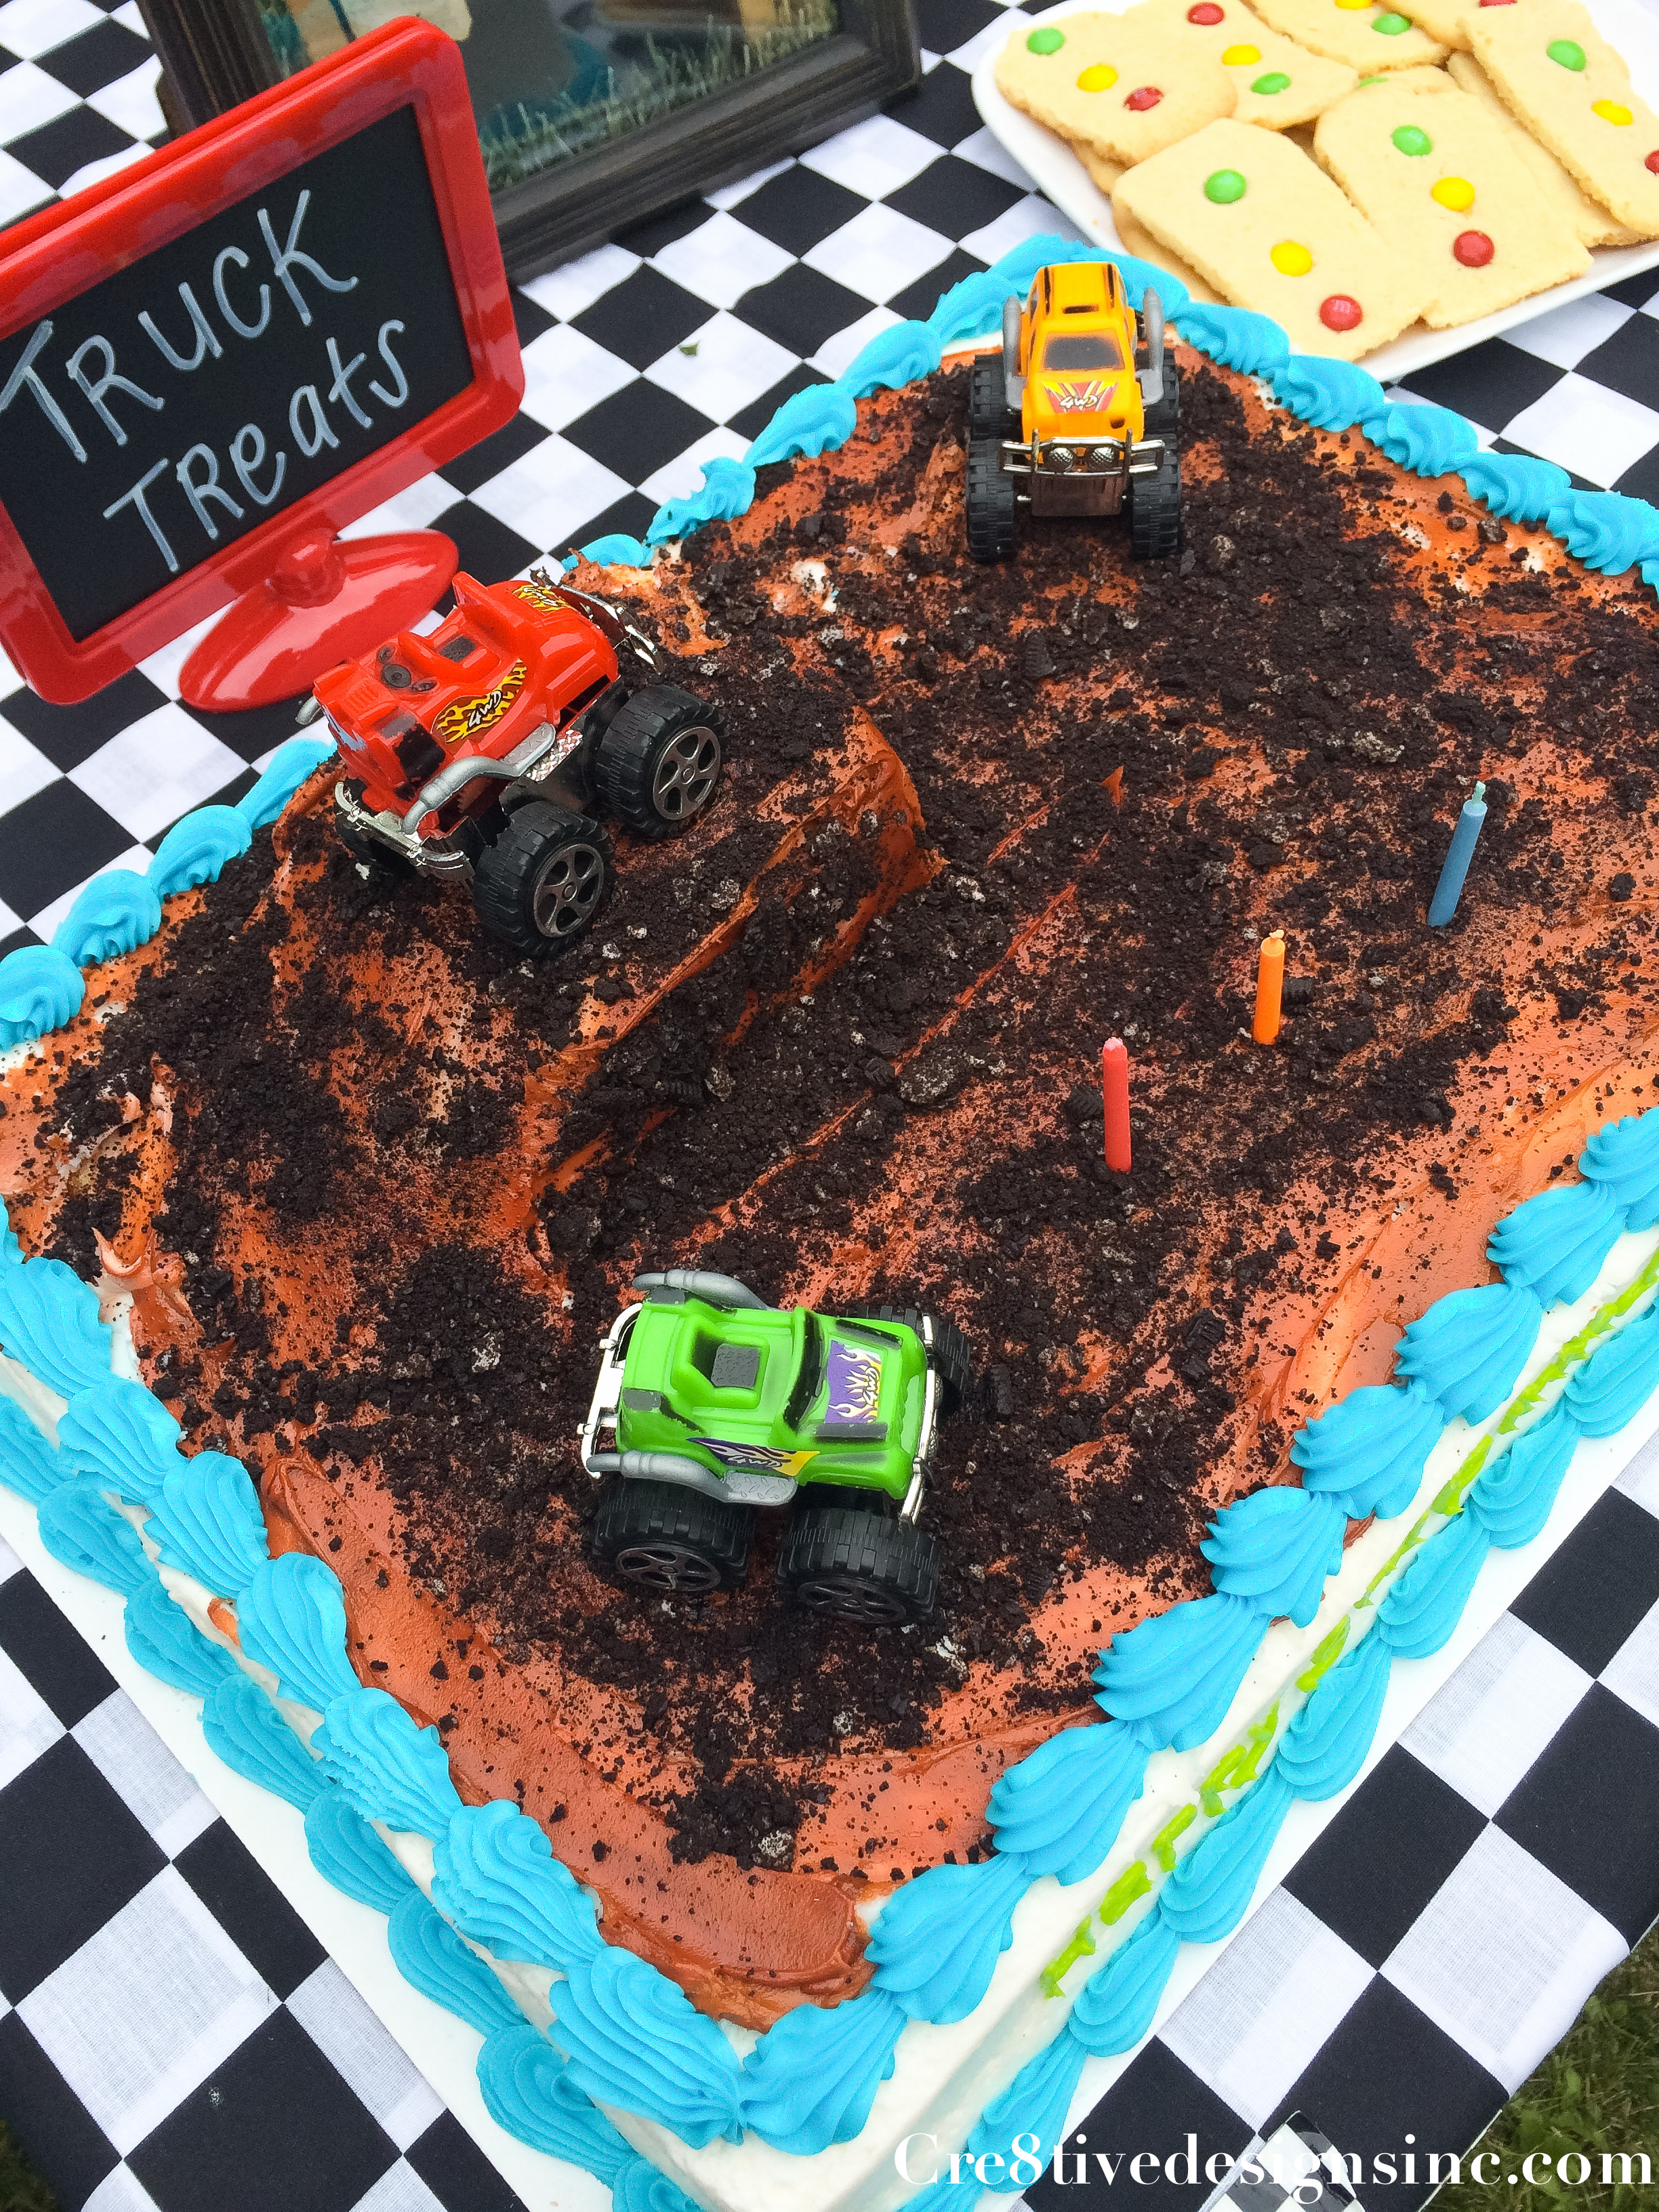 monster-truck-party-cre8tive-designs-inc